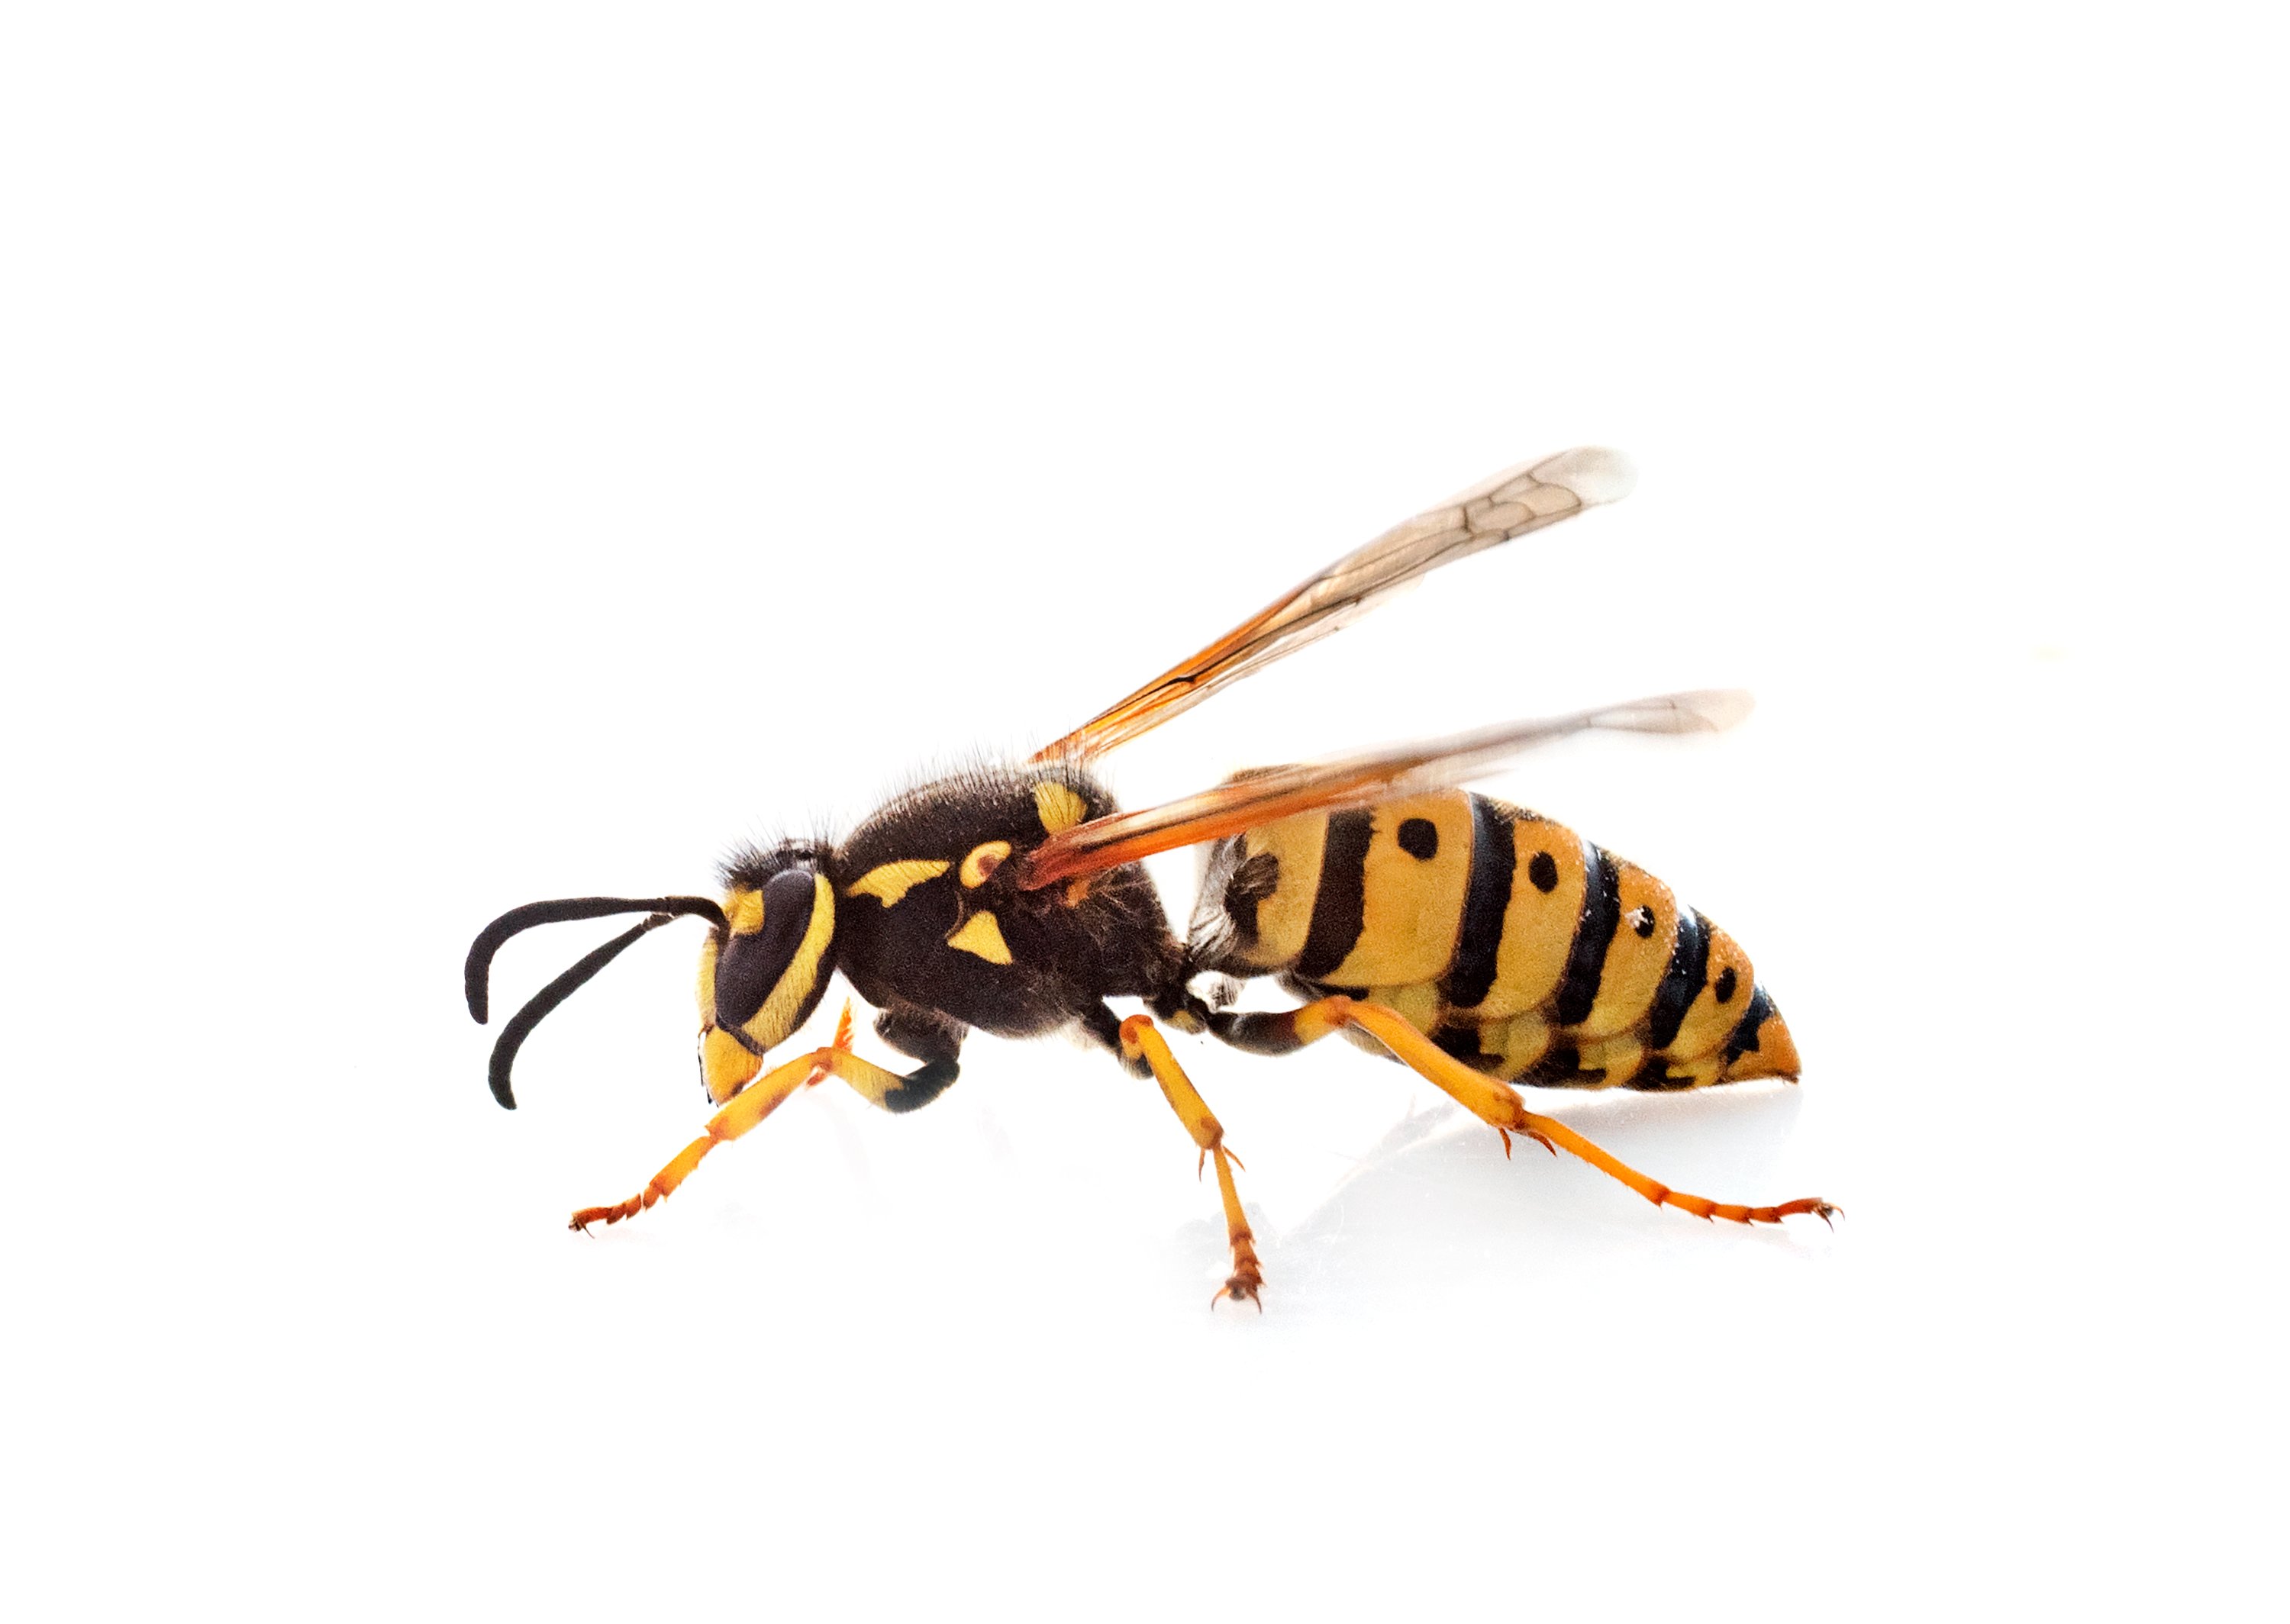 We know yellowjackets sting, but do they bite?